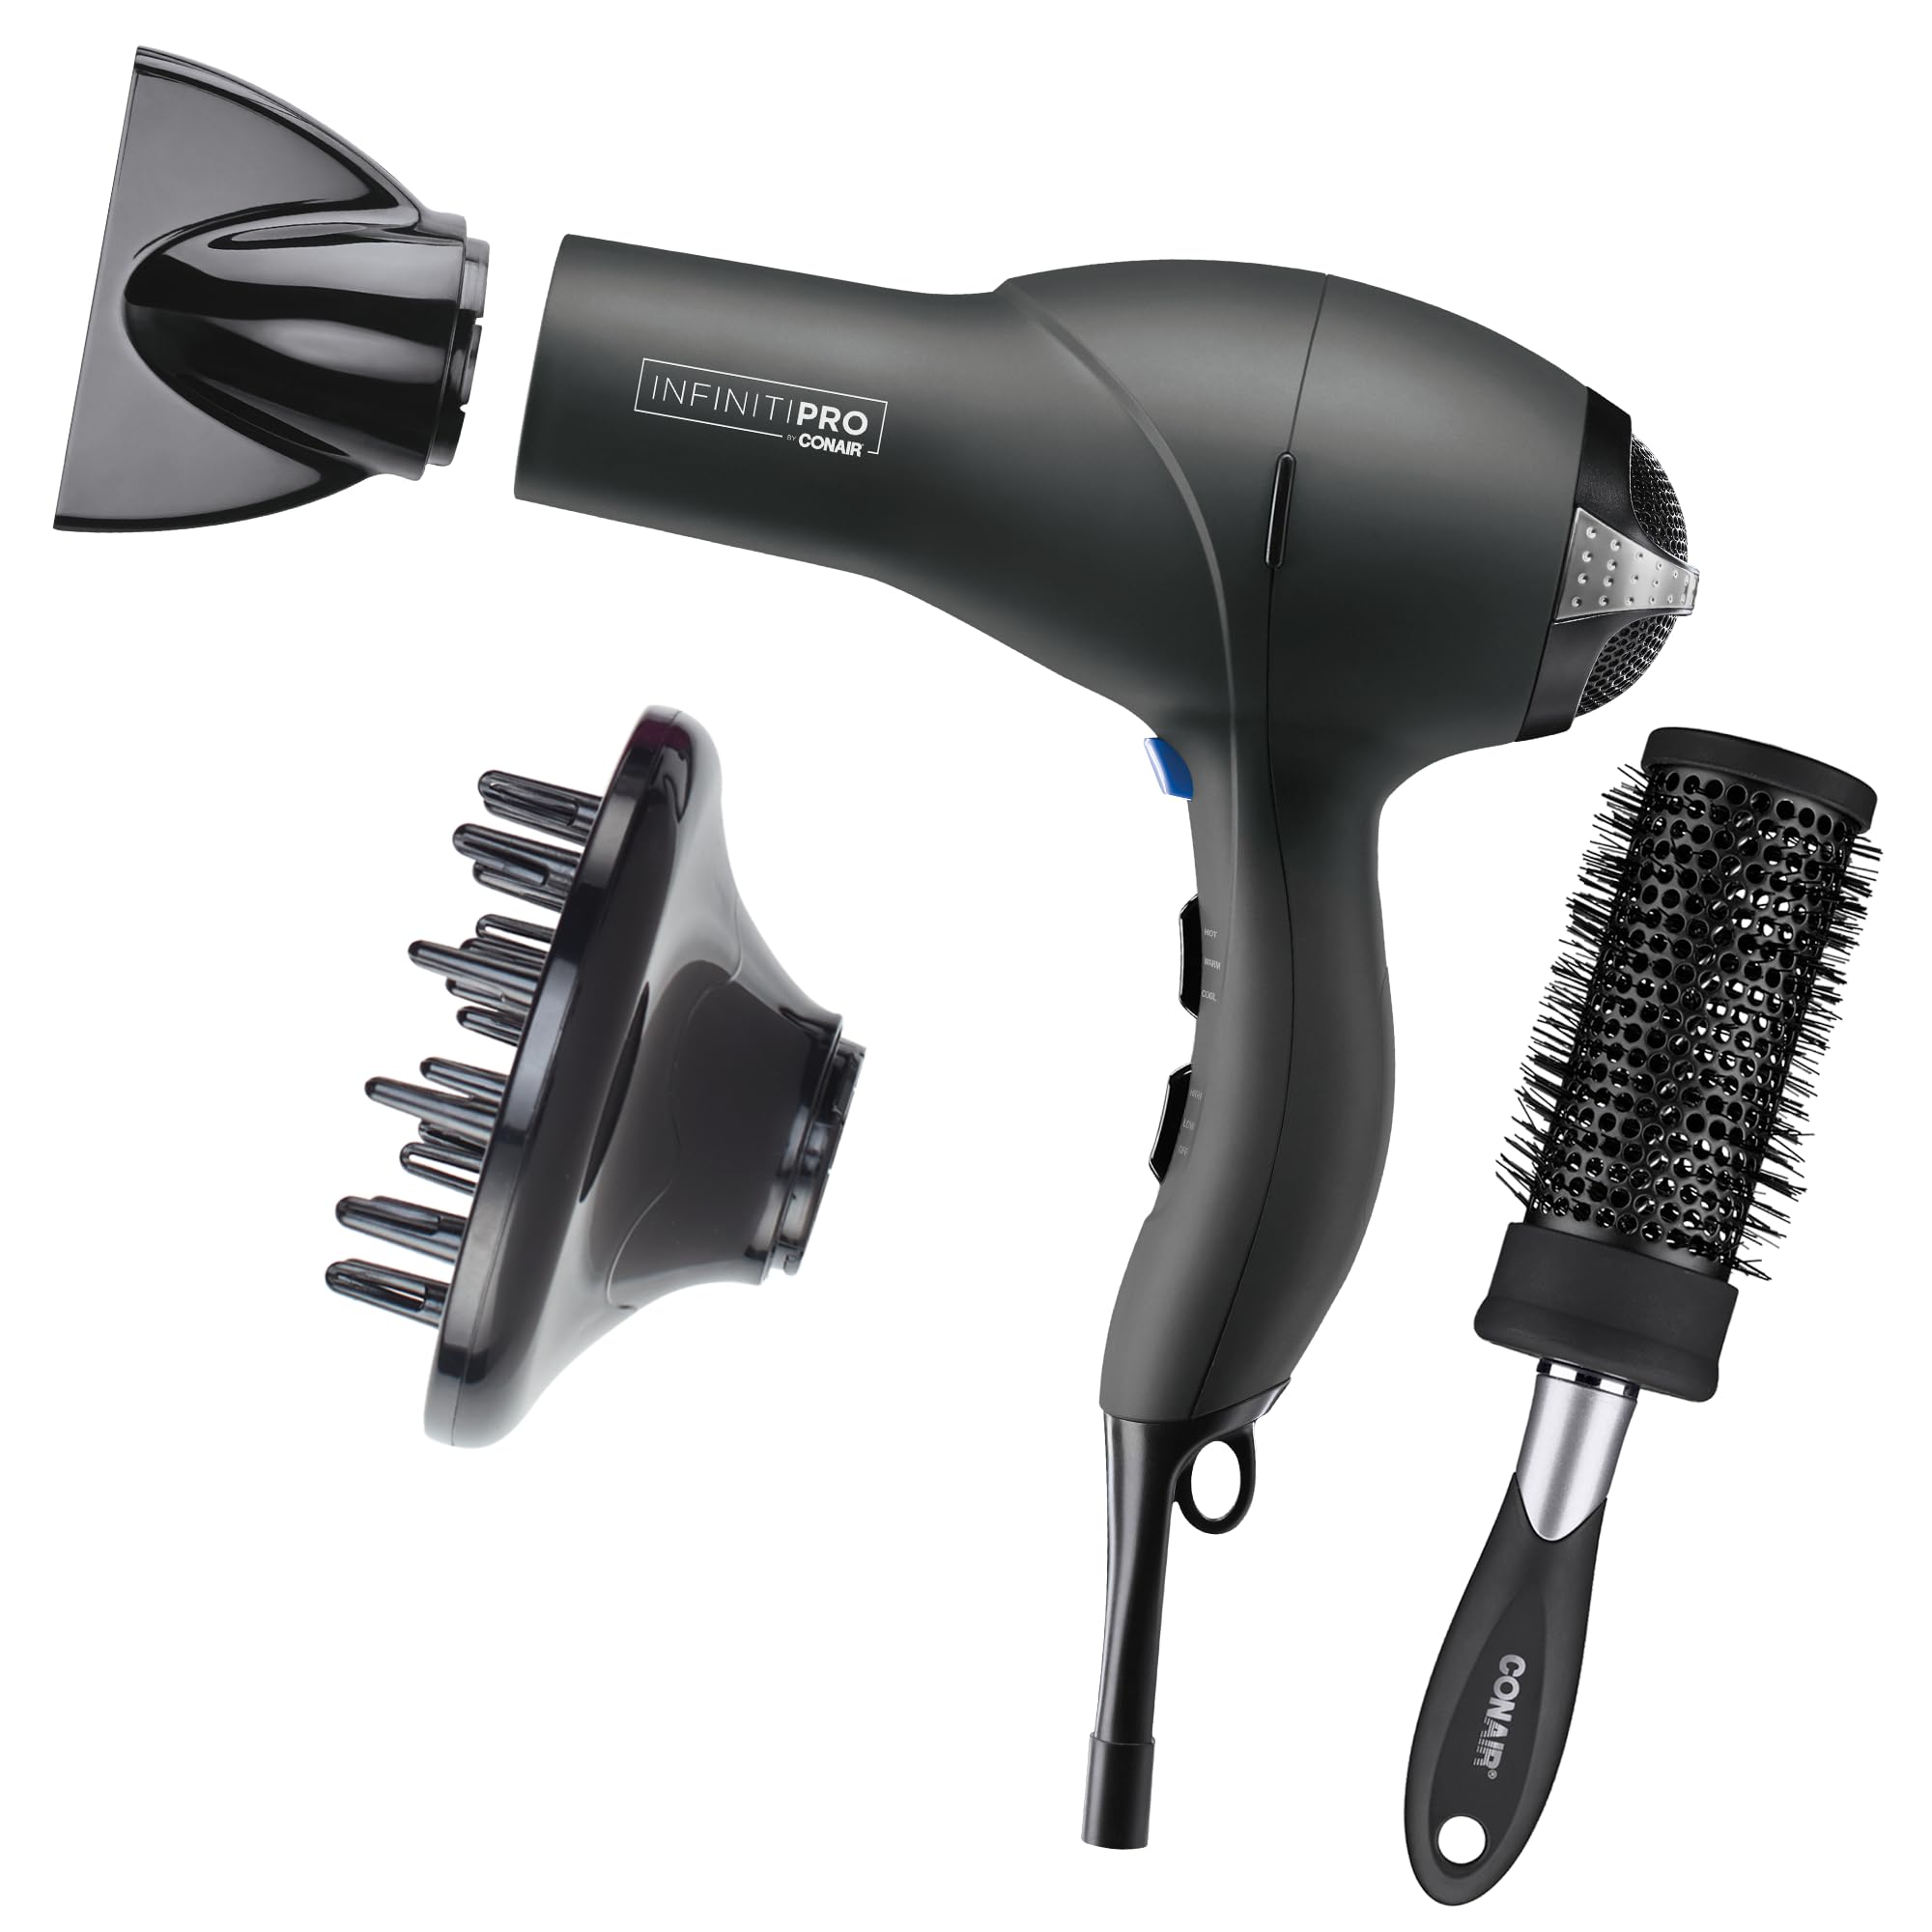 INFINITIPRO by CONAIR Hair Dryer, 1875W Salon Performance AC Motor Hair Dryer, Conair Blow Dryer, Grey with Bonus Blow-Out Brush $27.99 or with Prime $26.59